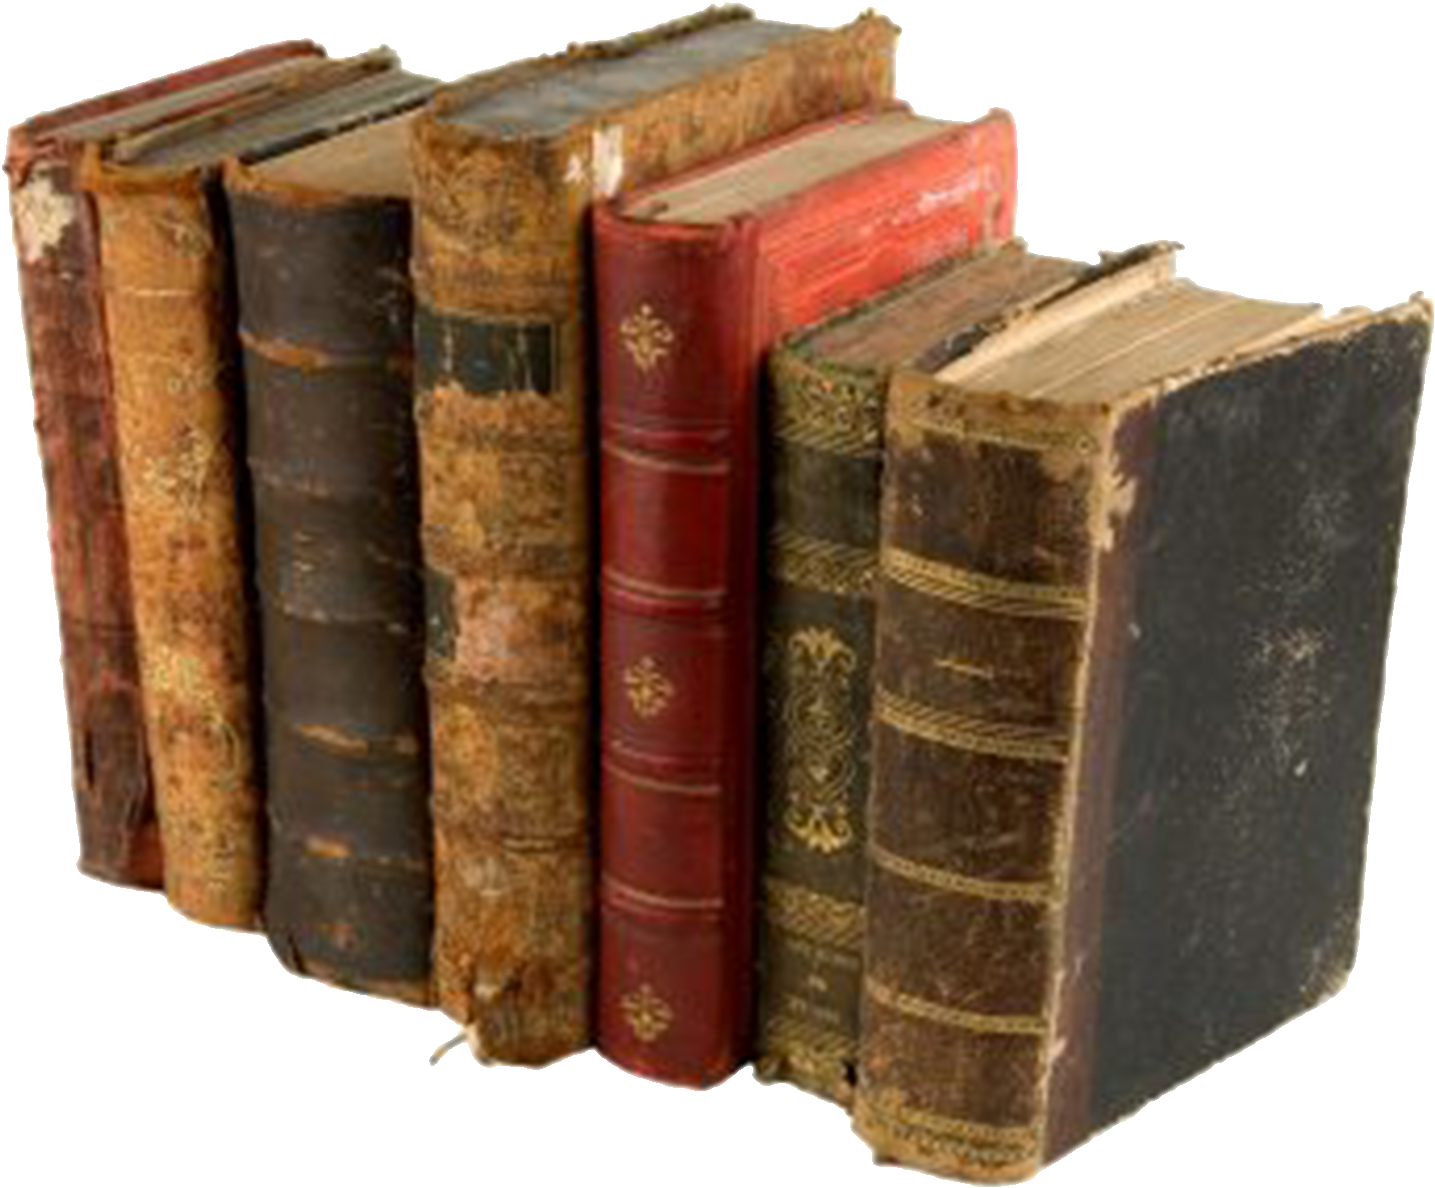 Antique Books Collection PNG